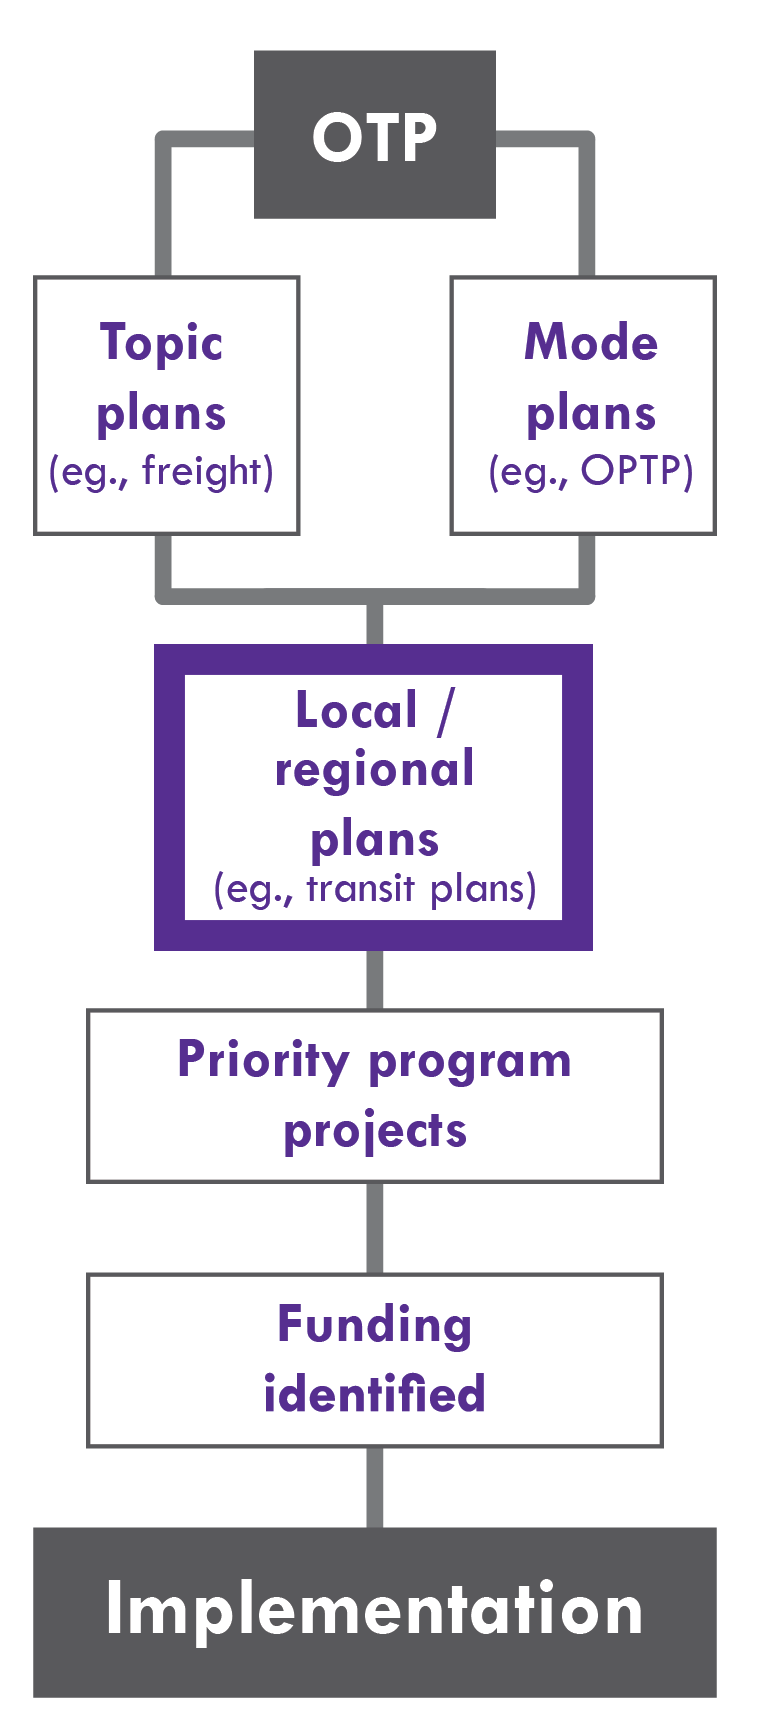 The Oregon Transportation Plan informs topic and mode plans, which in turn informs local/regional plans, which guide priority program projects and funding identification leading to implementation.